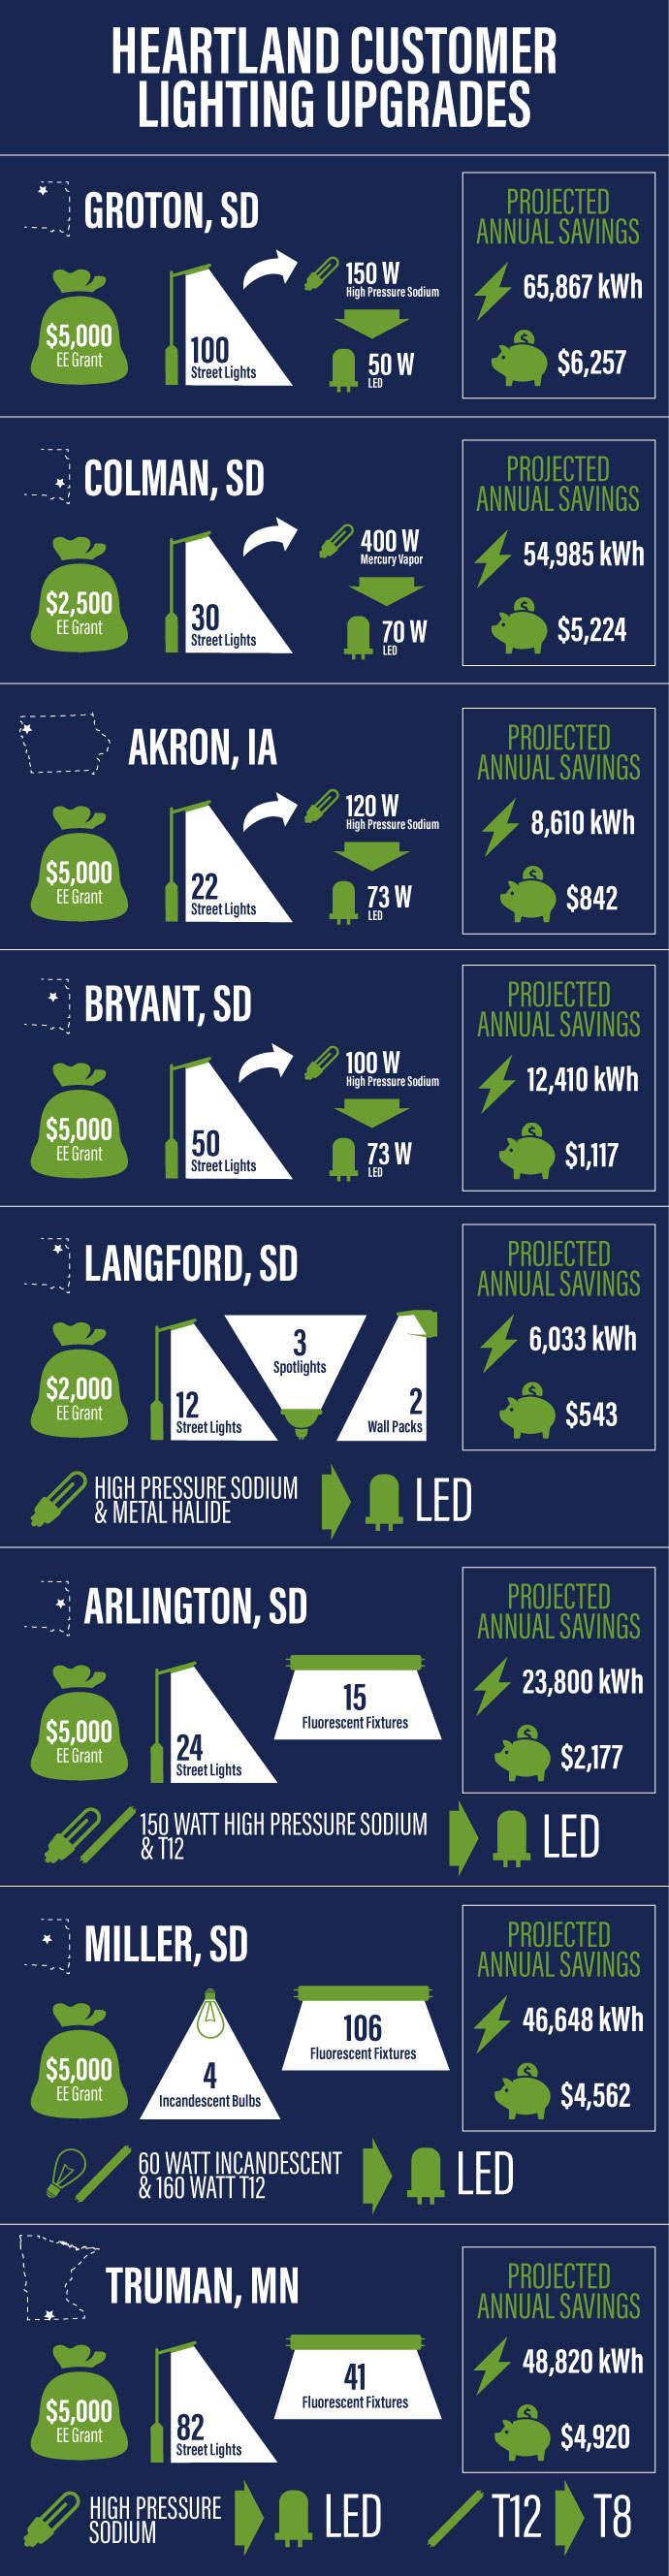 LED-infographic-2016